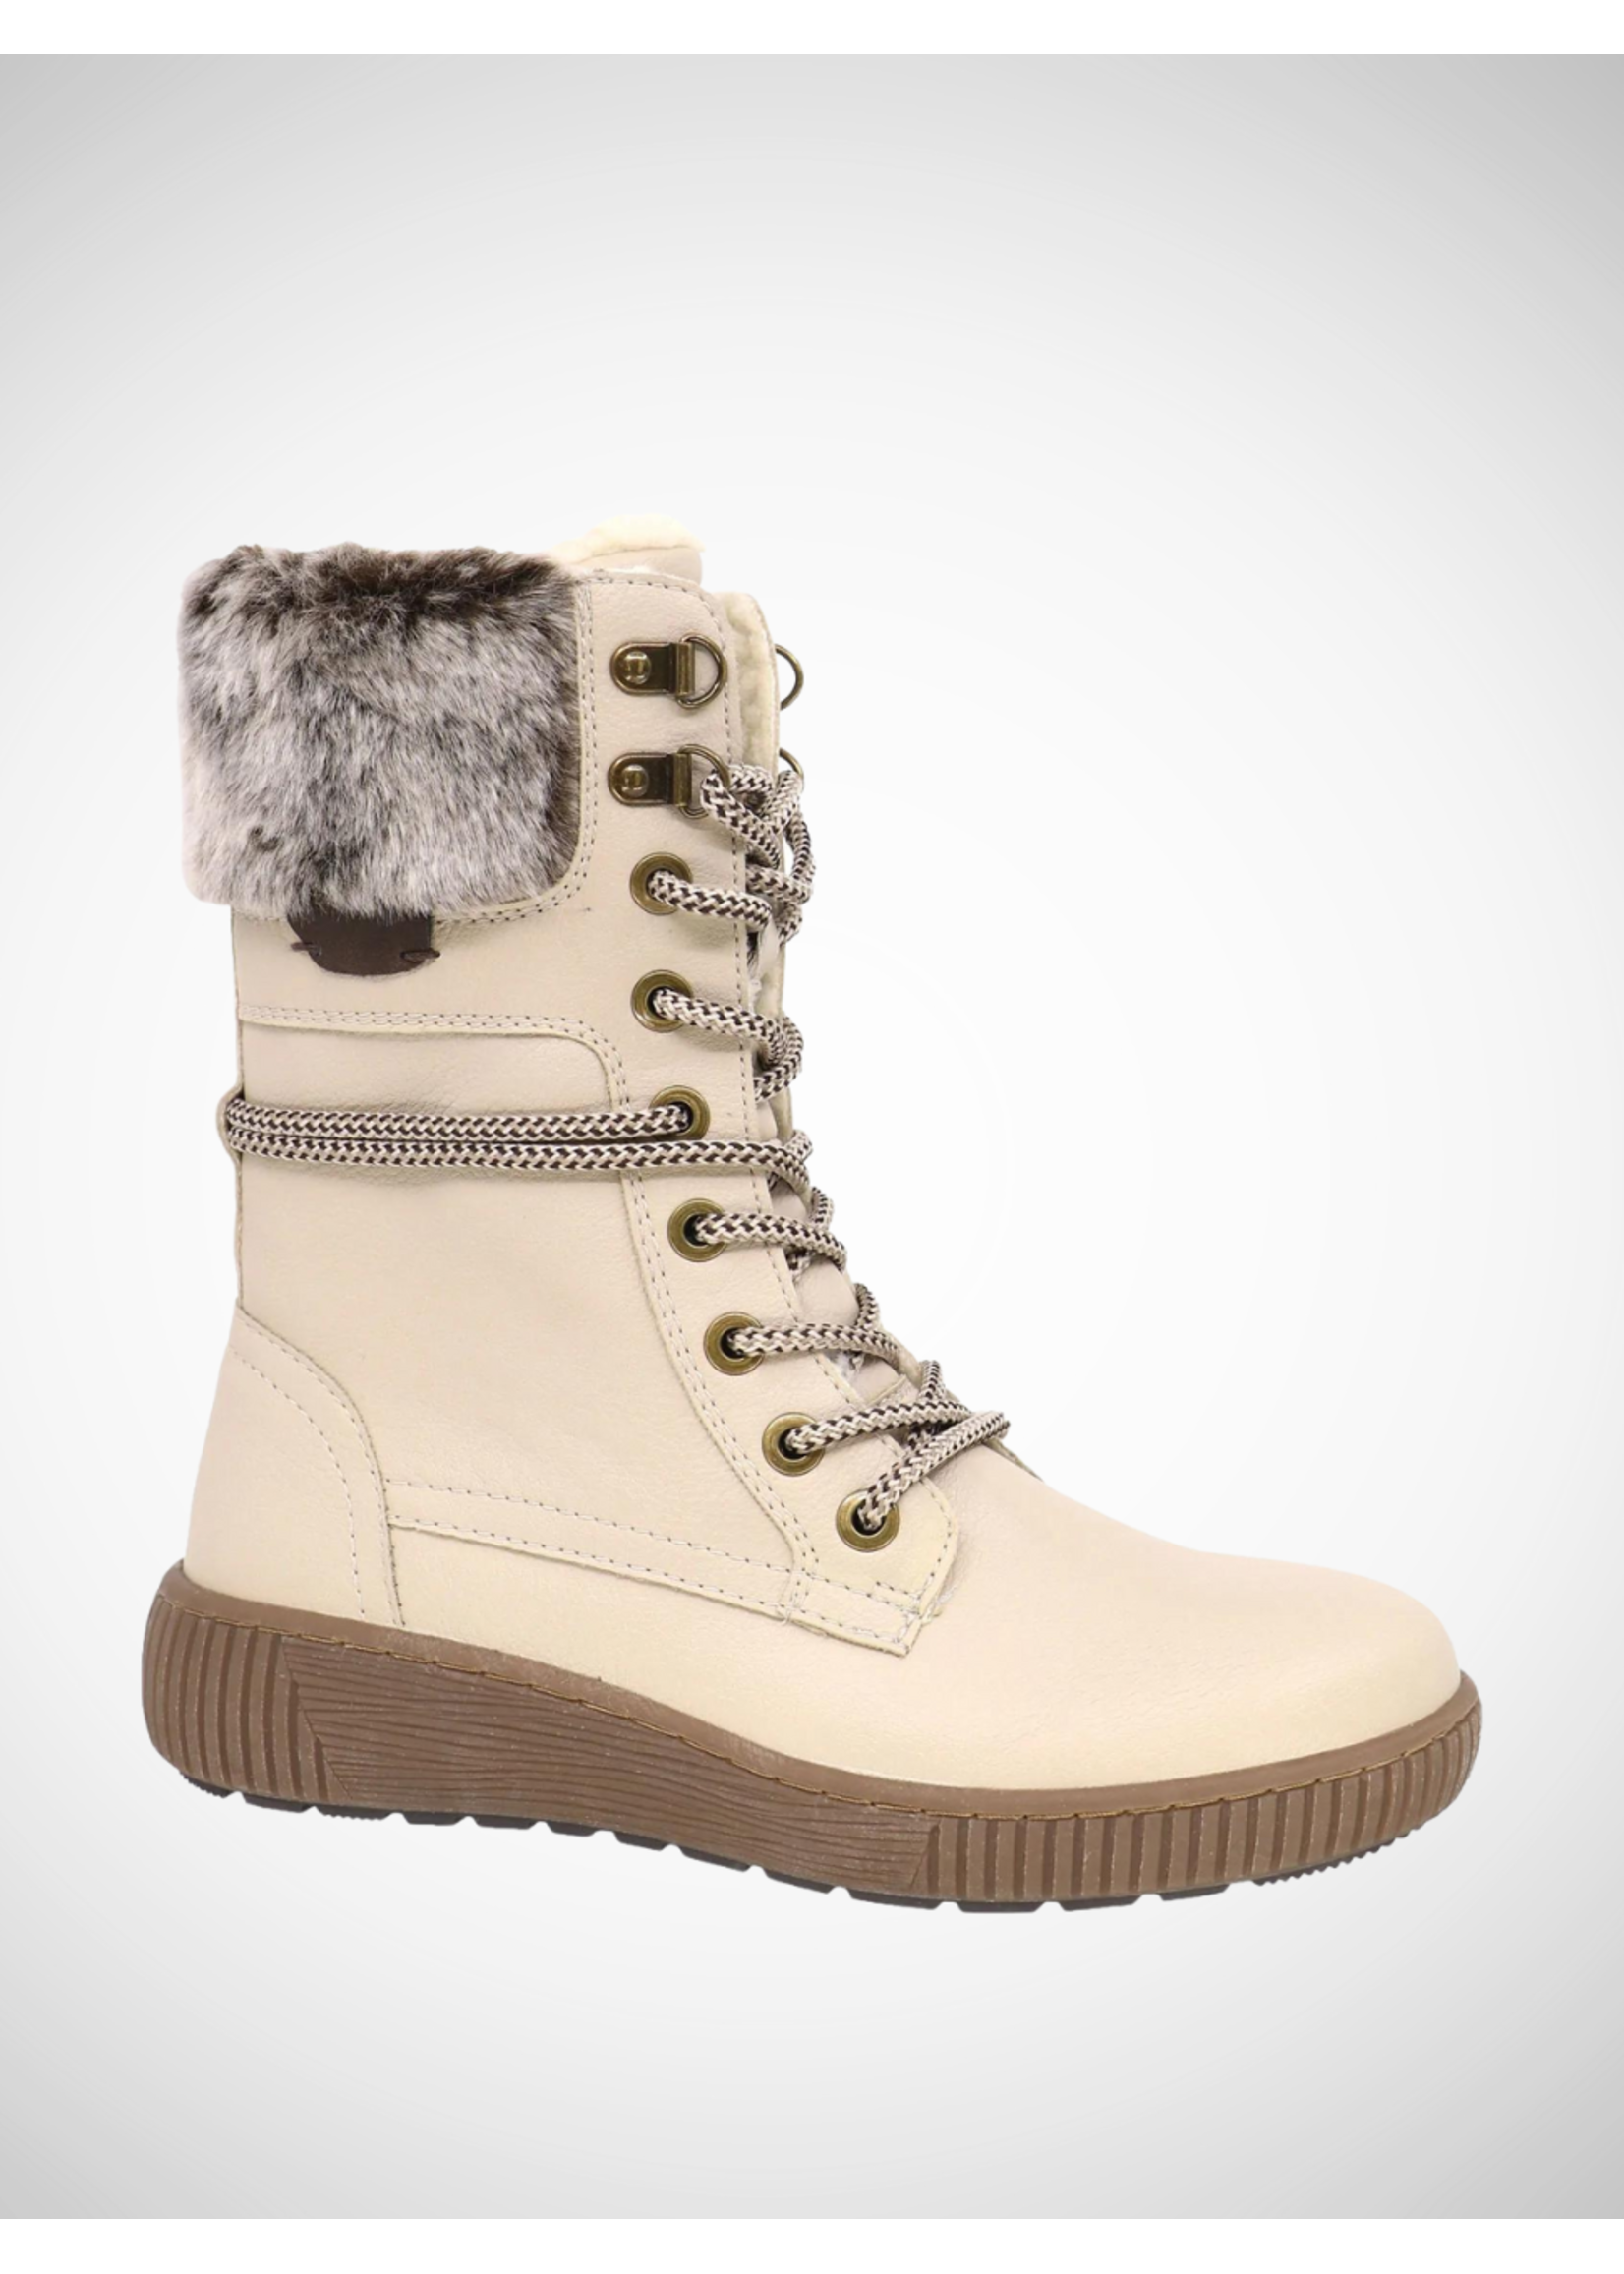 Taxi Taxi Boot Kenzie 03 Mid Calf Boot WP